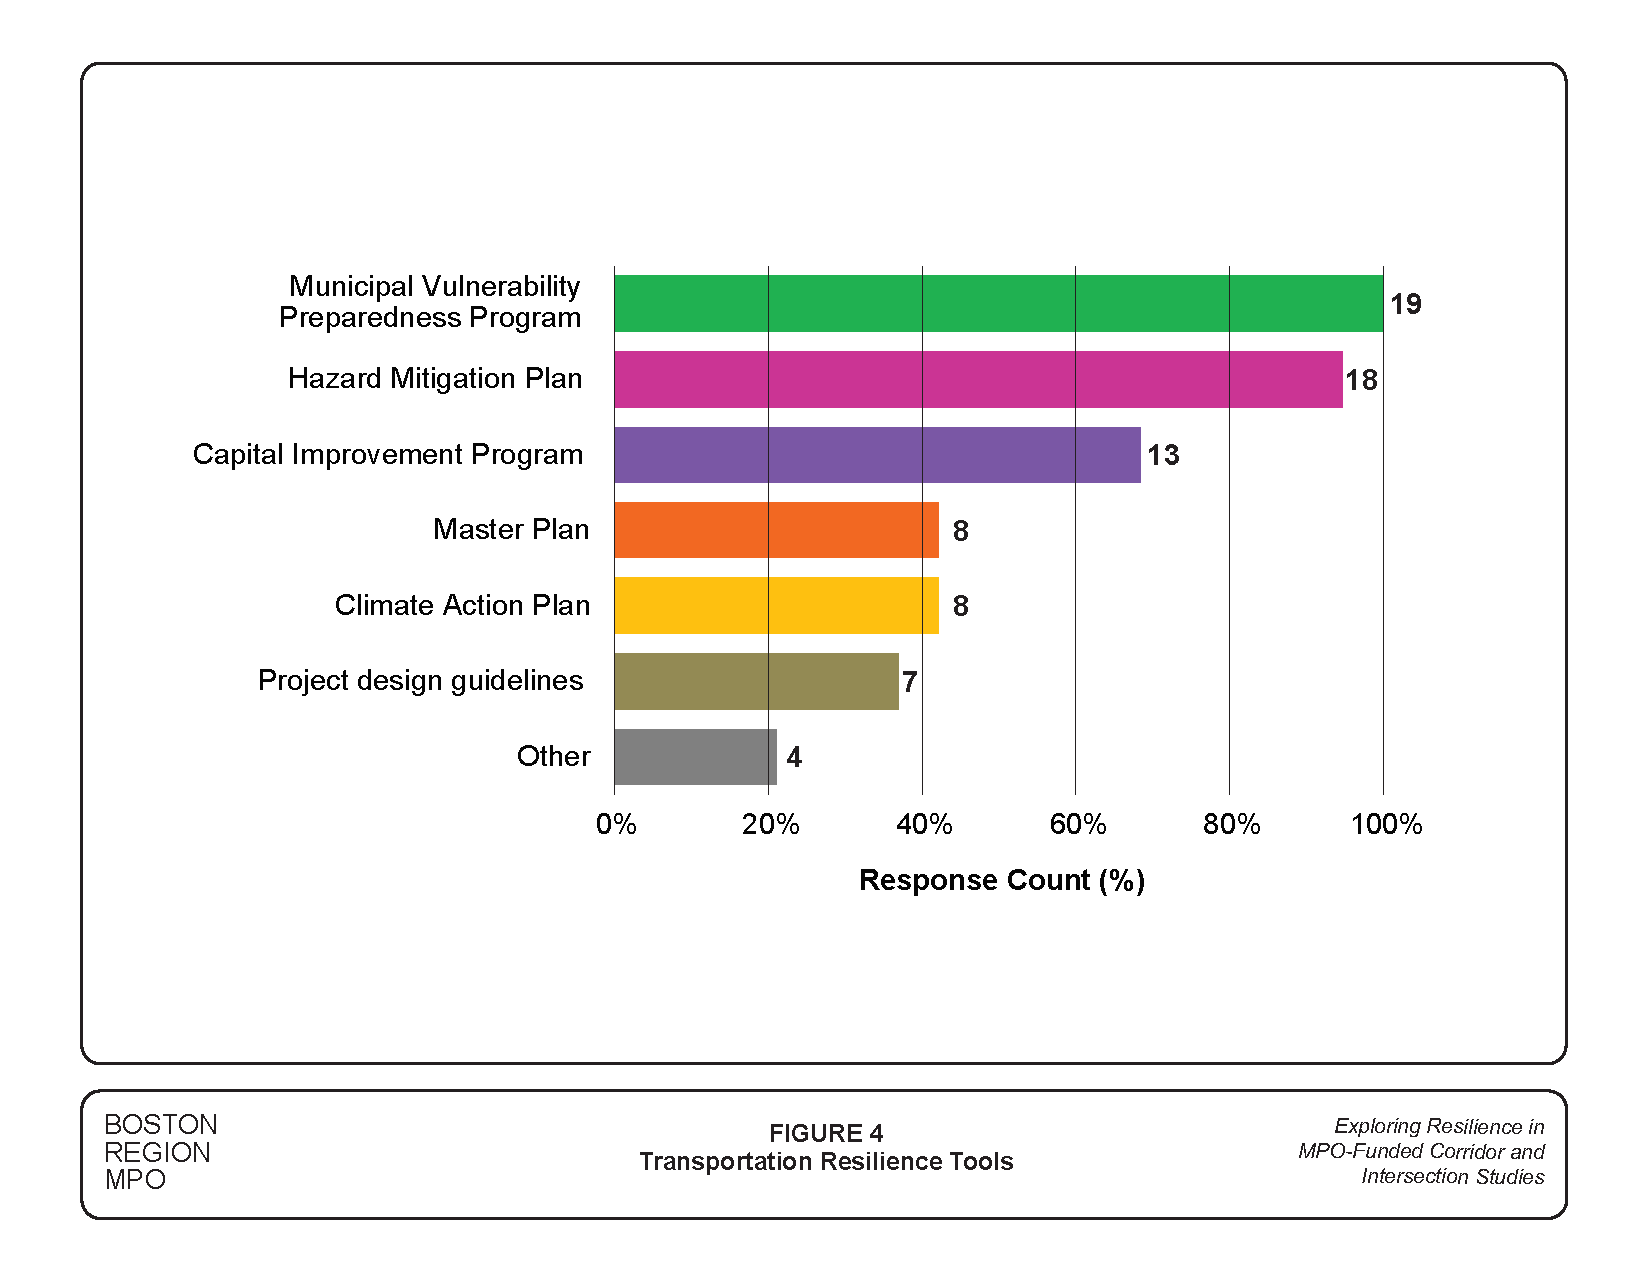 Figure 4 is a graph showing the survey results about how is transportation resilience being addressed by municipalities.